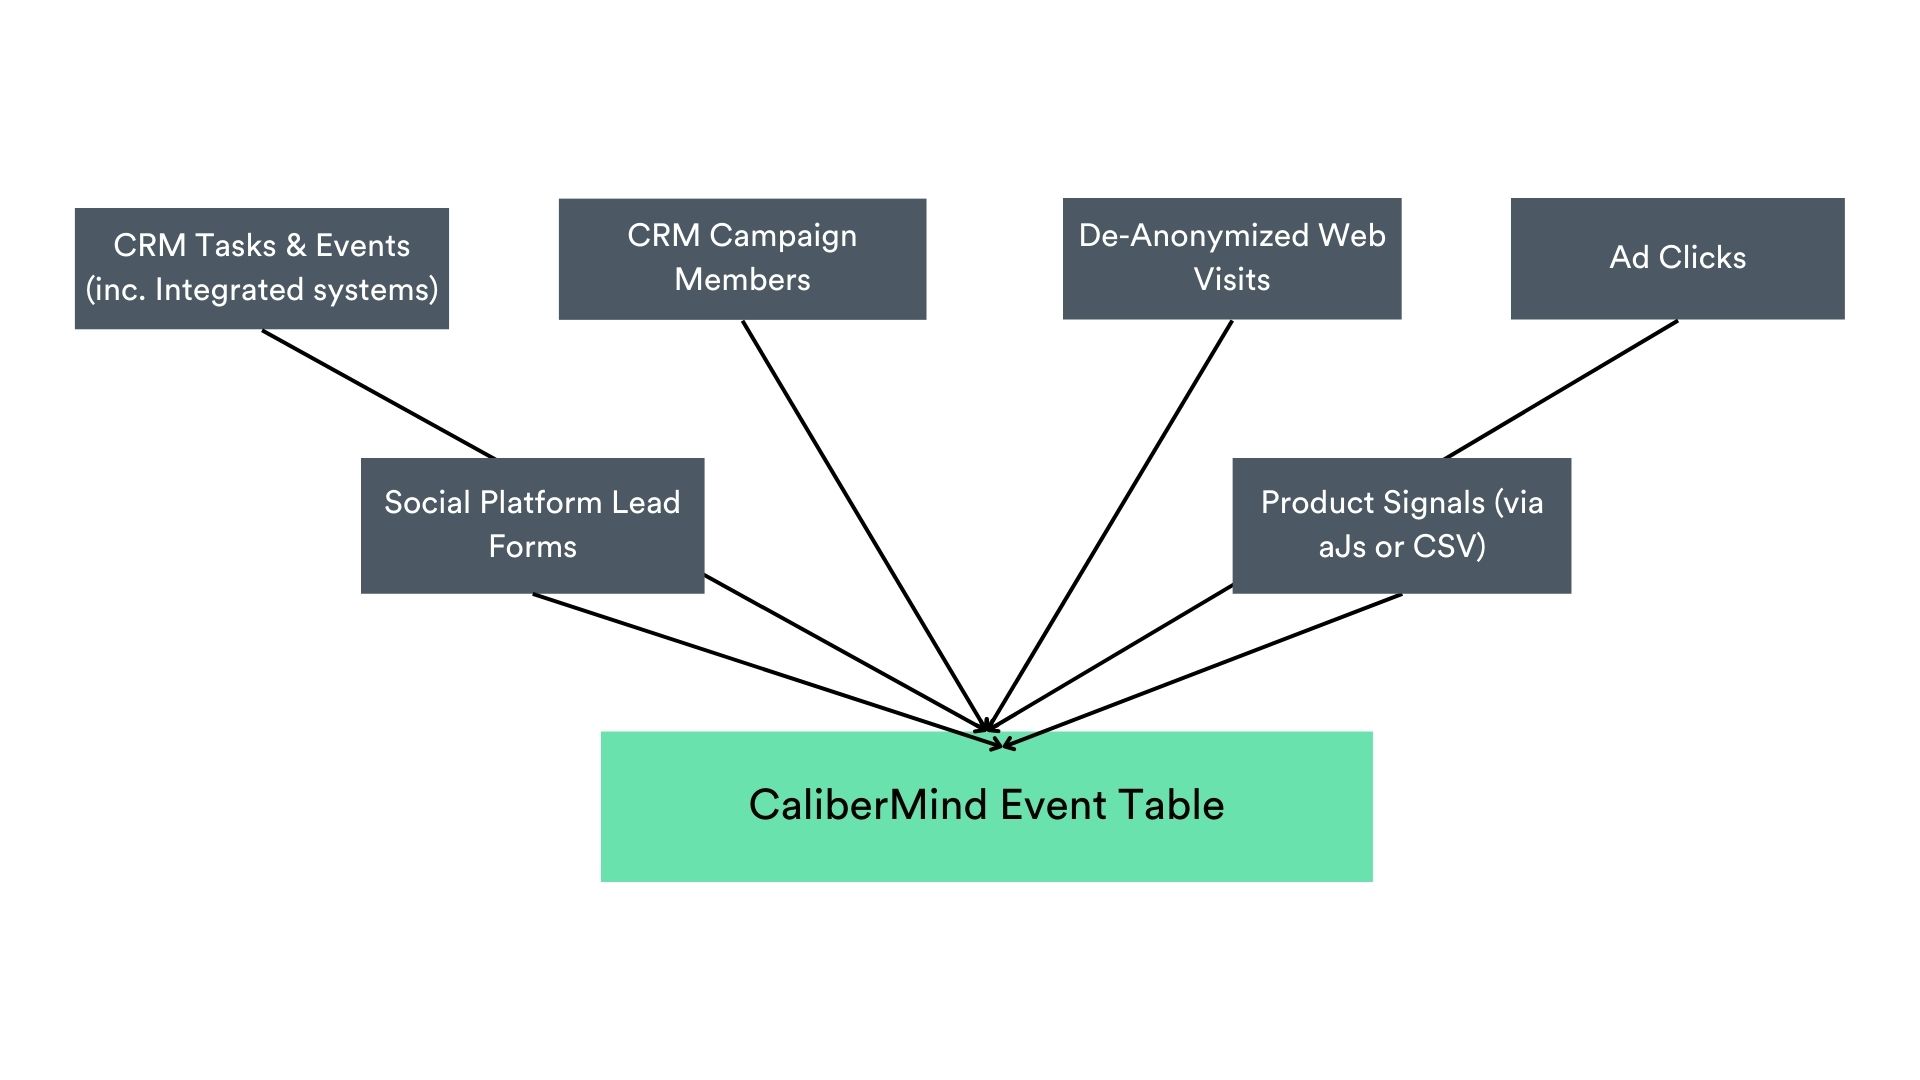 where do calibermind events come from